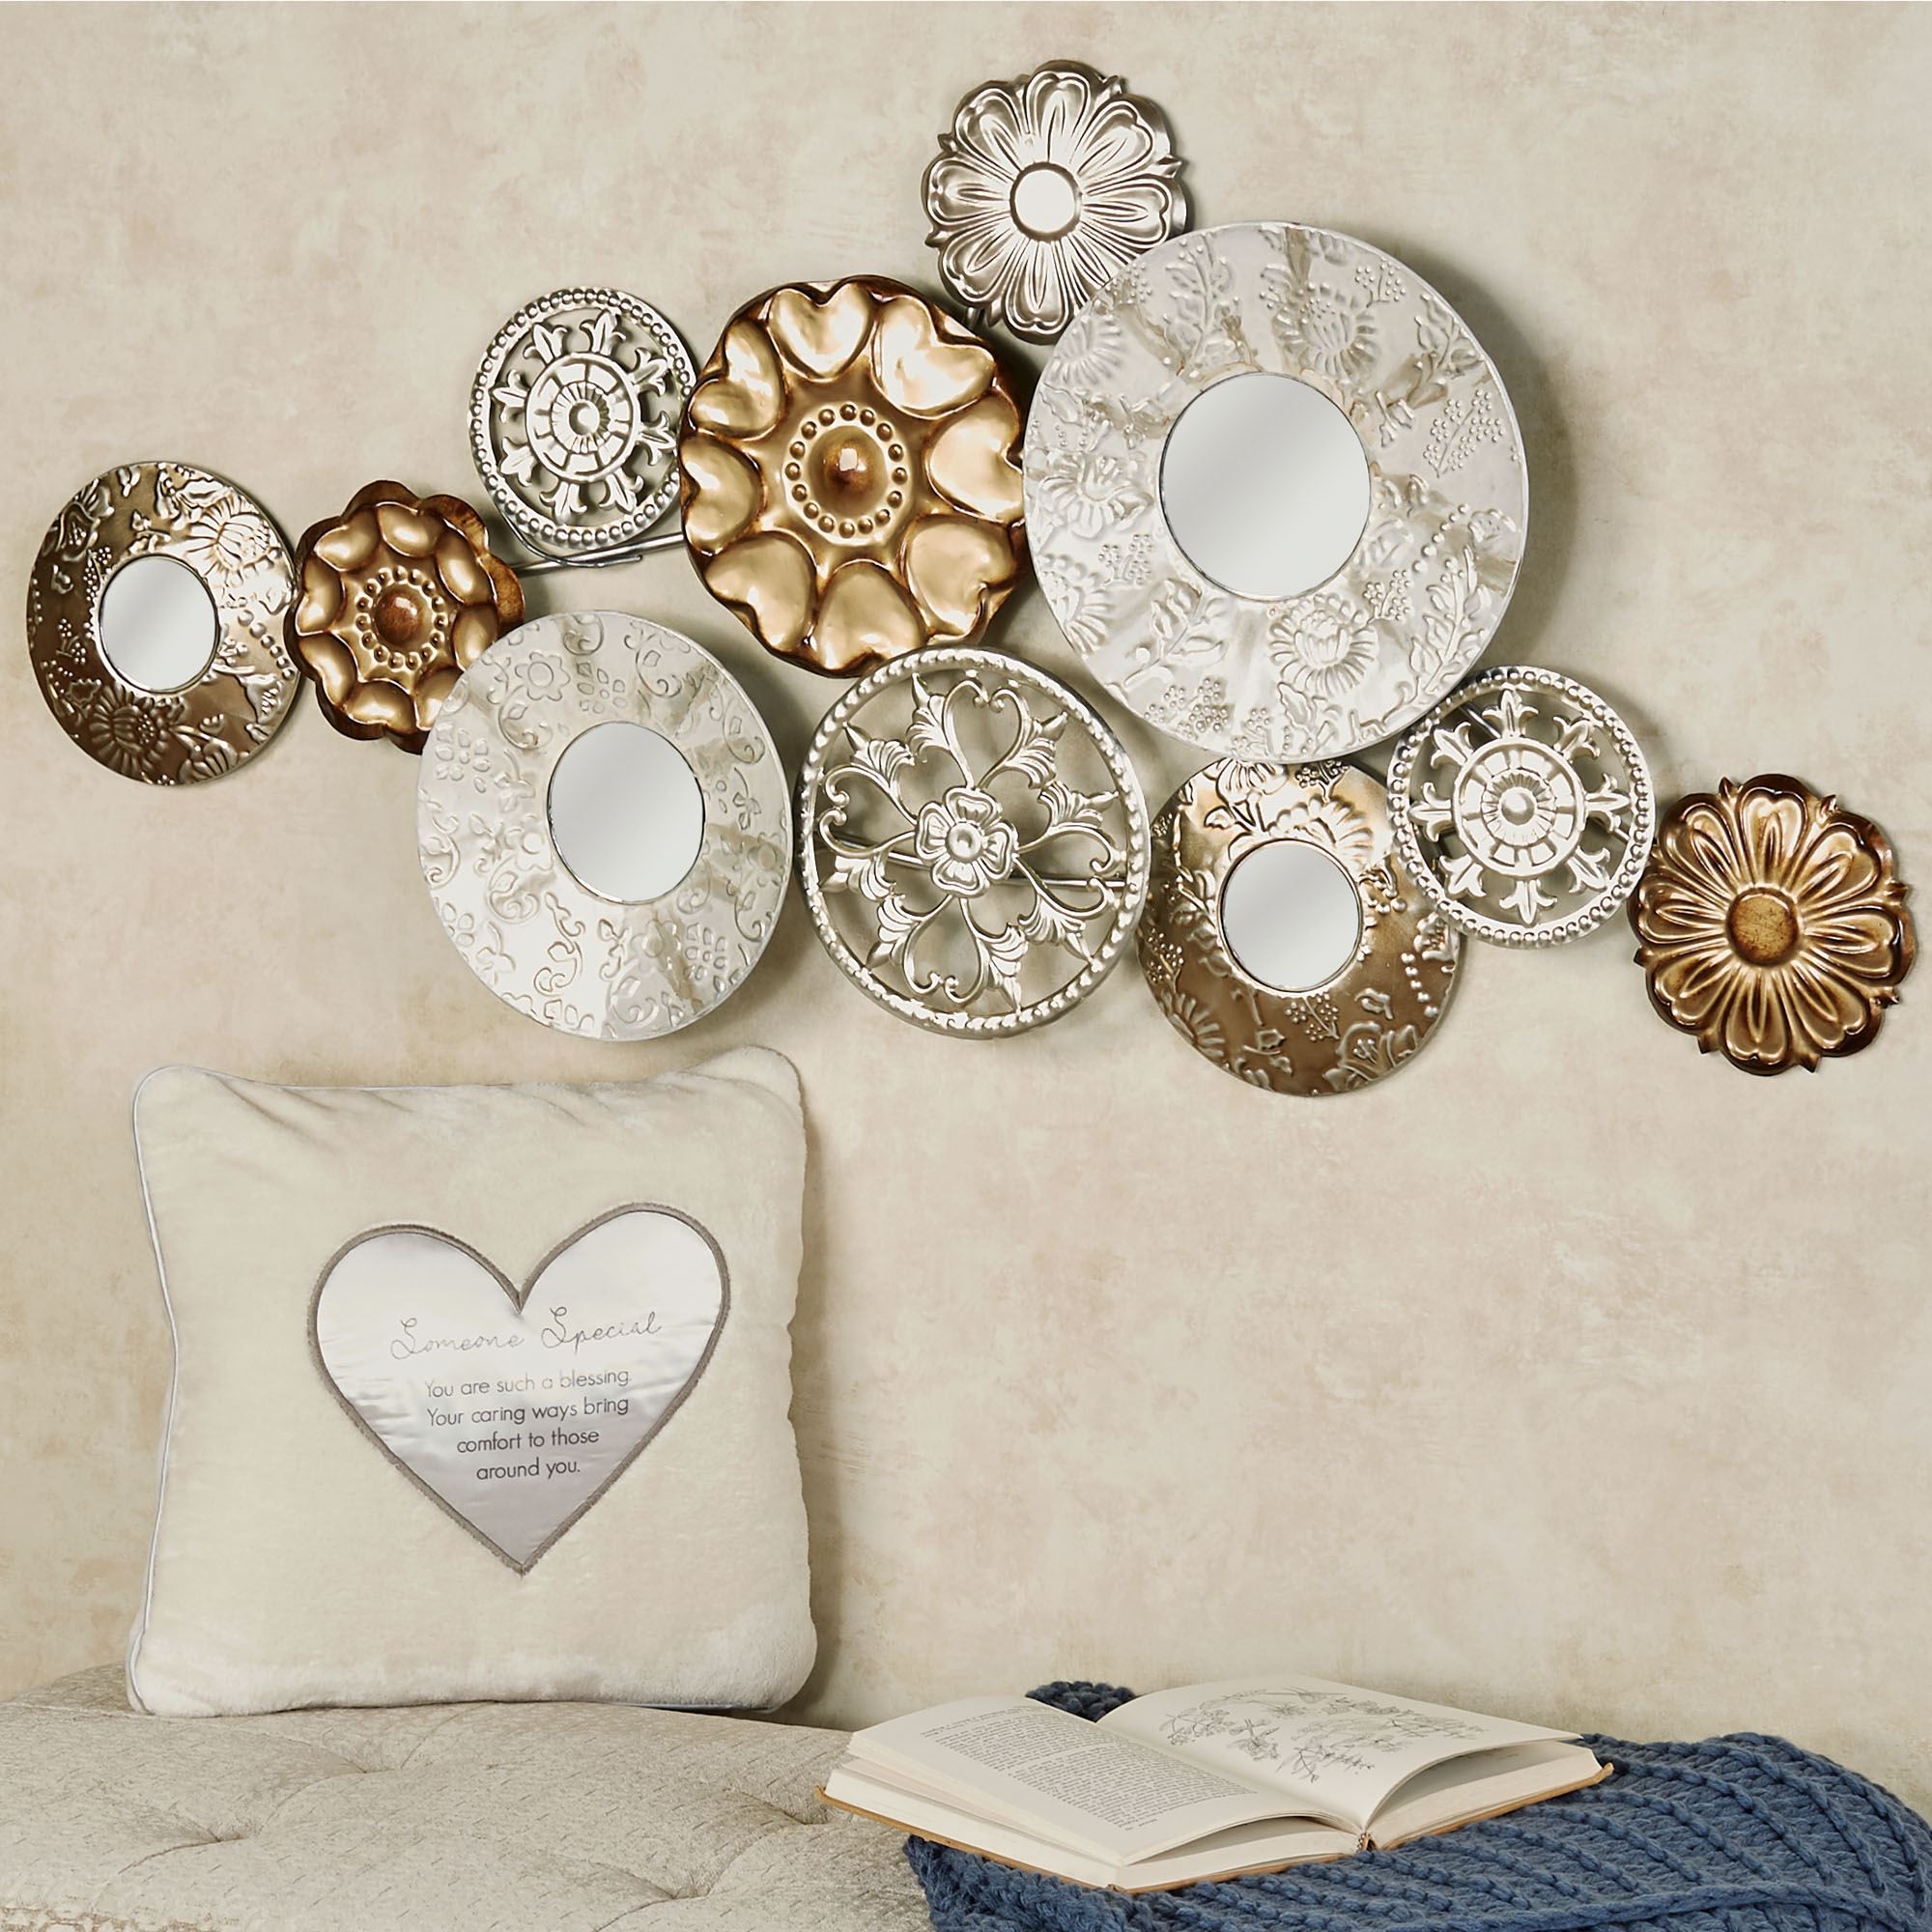 Elegant Composition Medallion Mirrored Metal Wall Art With Best And Newest Gold And Silver Metal Wall Art (View 1 of 20)